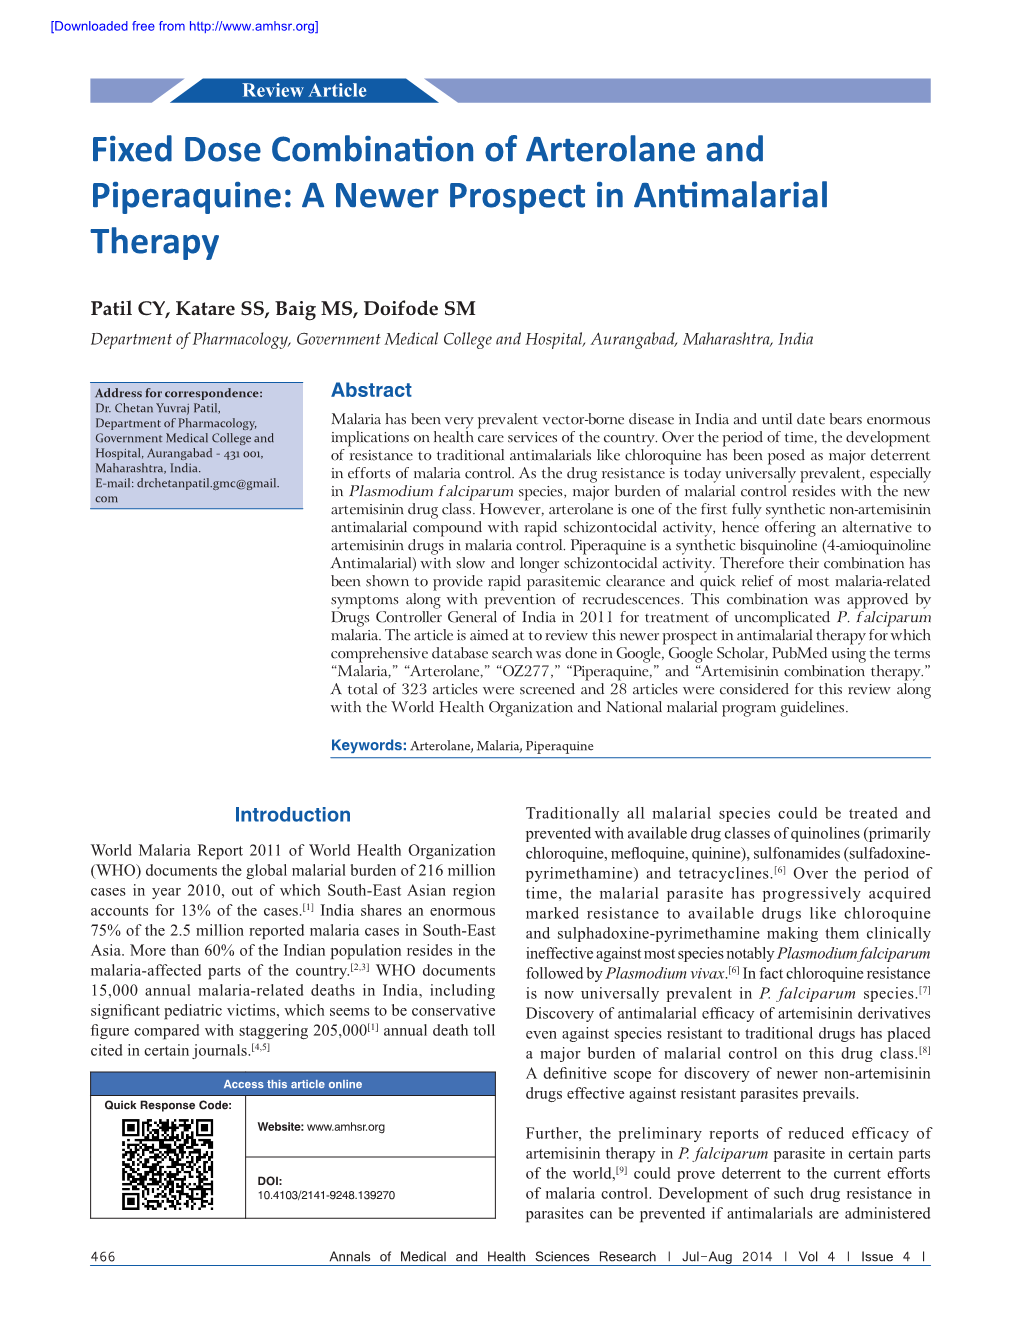 Fixed Dose Combination of Arterolane and Piperaquine: a Newer Prospect in Antimalarial Therapy